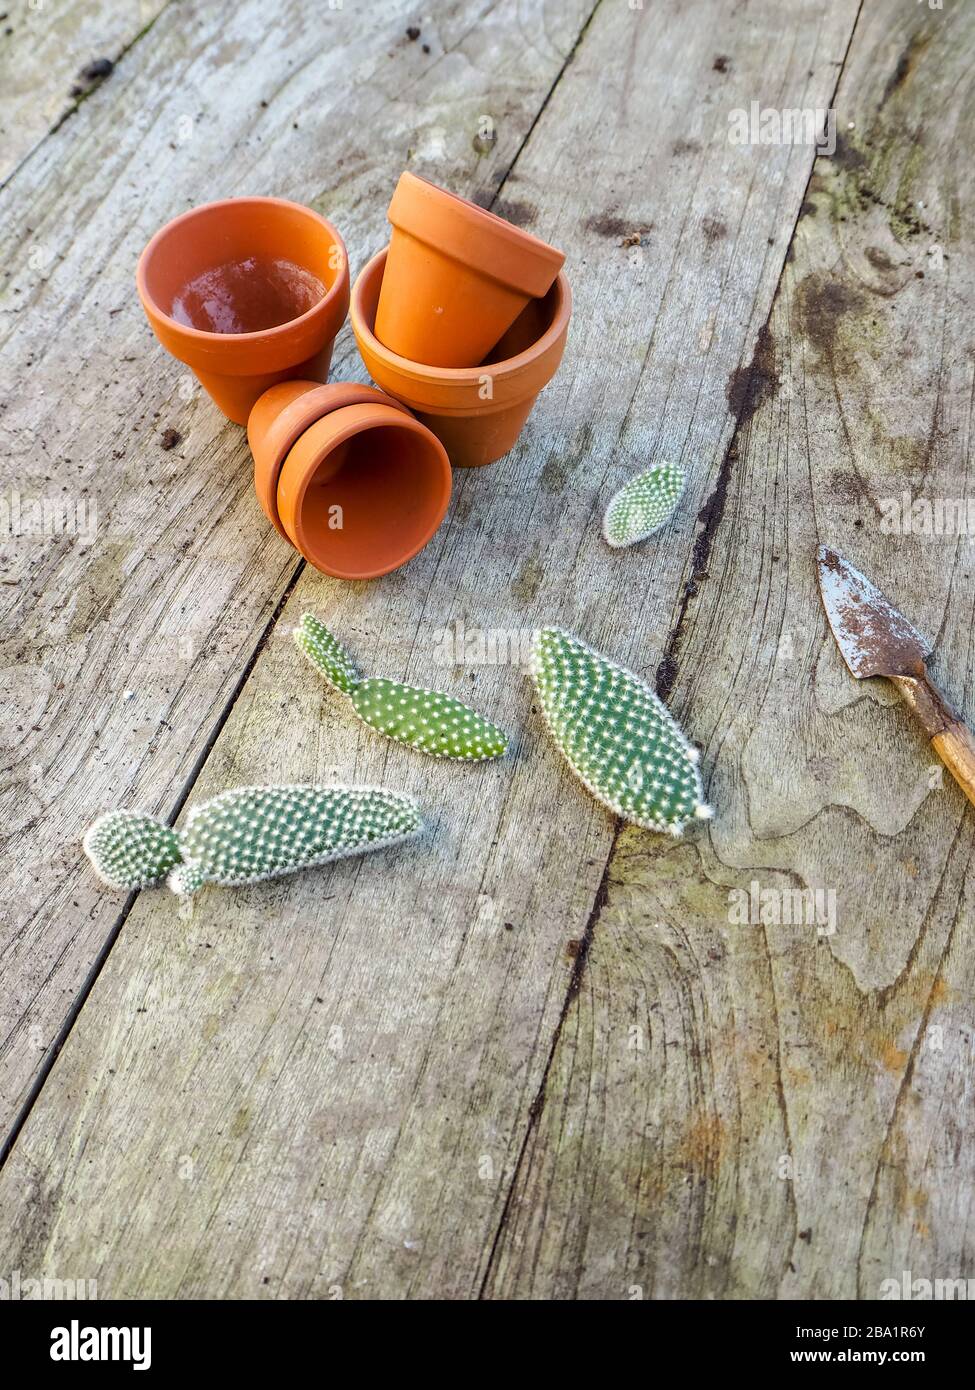 Small pads of the cactus opuntia microdasys, commonly known as bunny ears cactus on a wooden table ready to be planted in terracotta pots Stock Photo